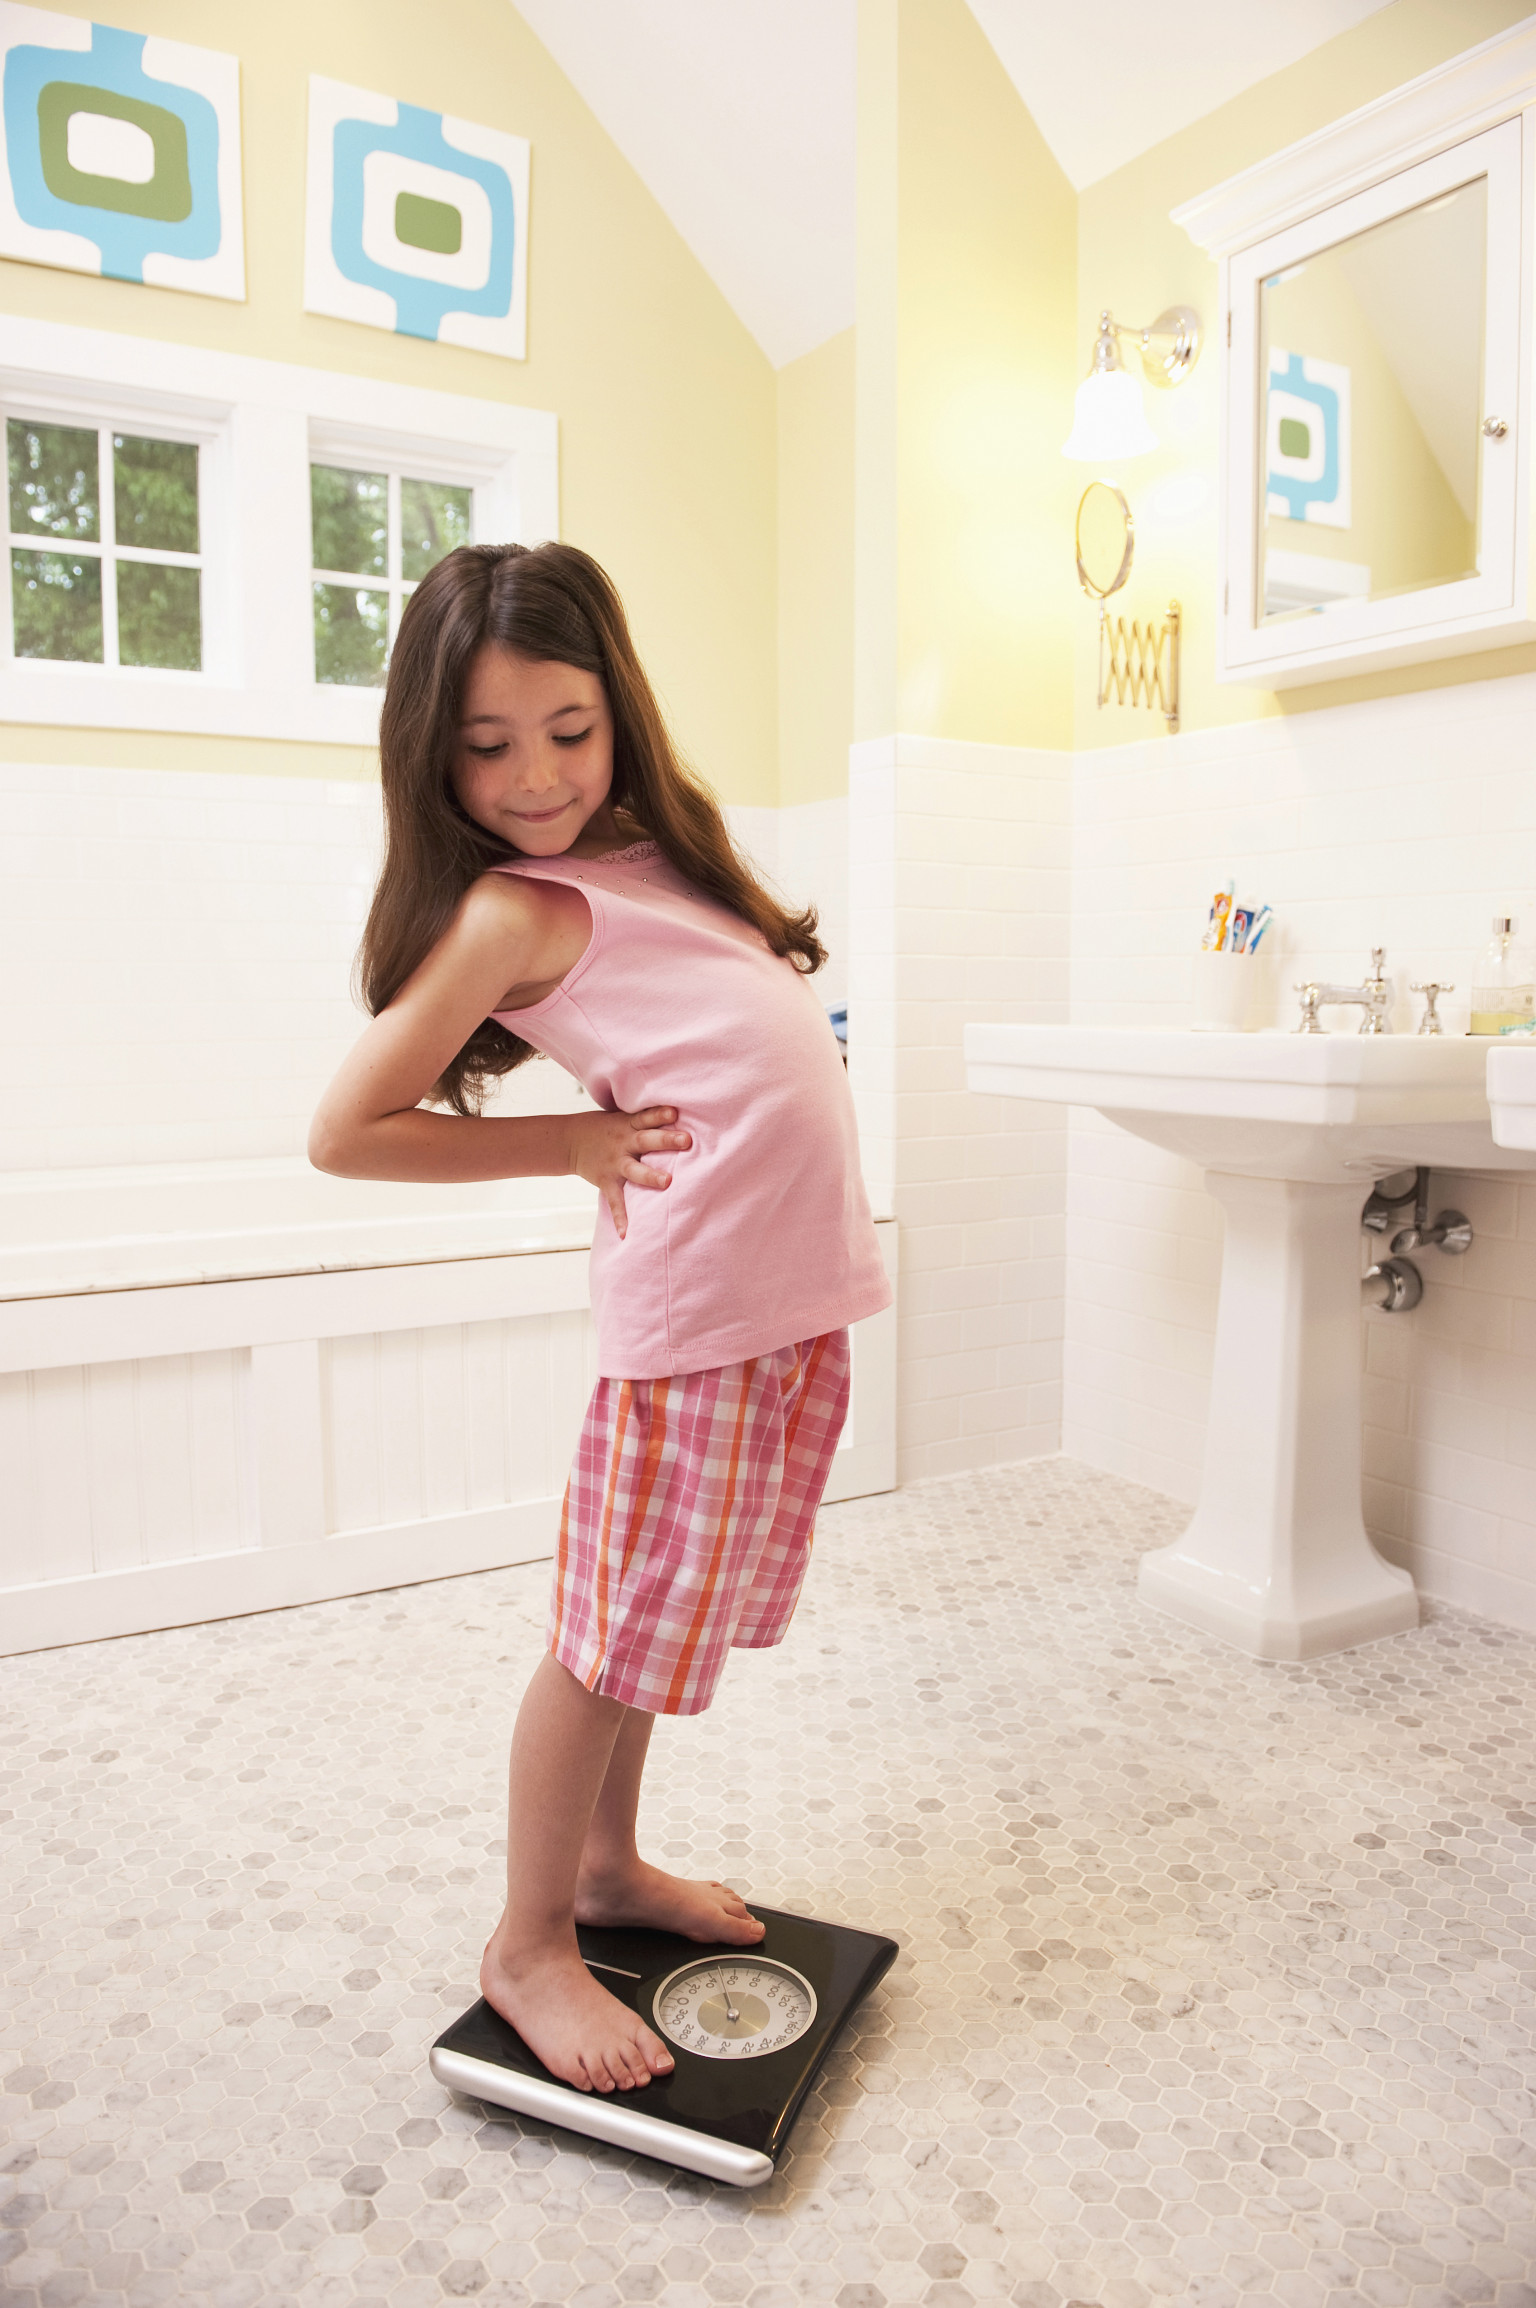 Little Girls, Big Problems What Stock Photos Say About Body Image ... pic photo